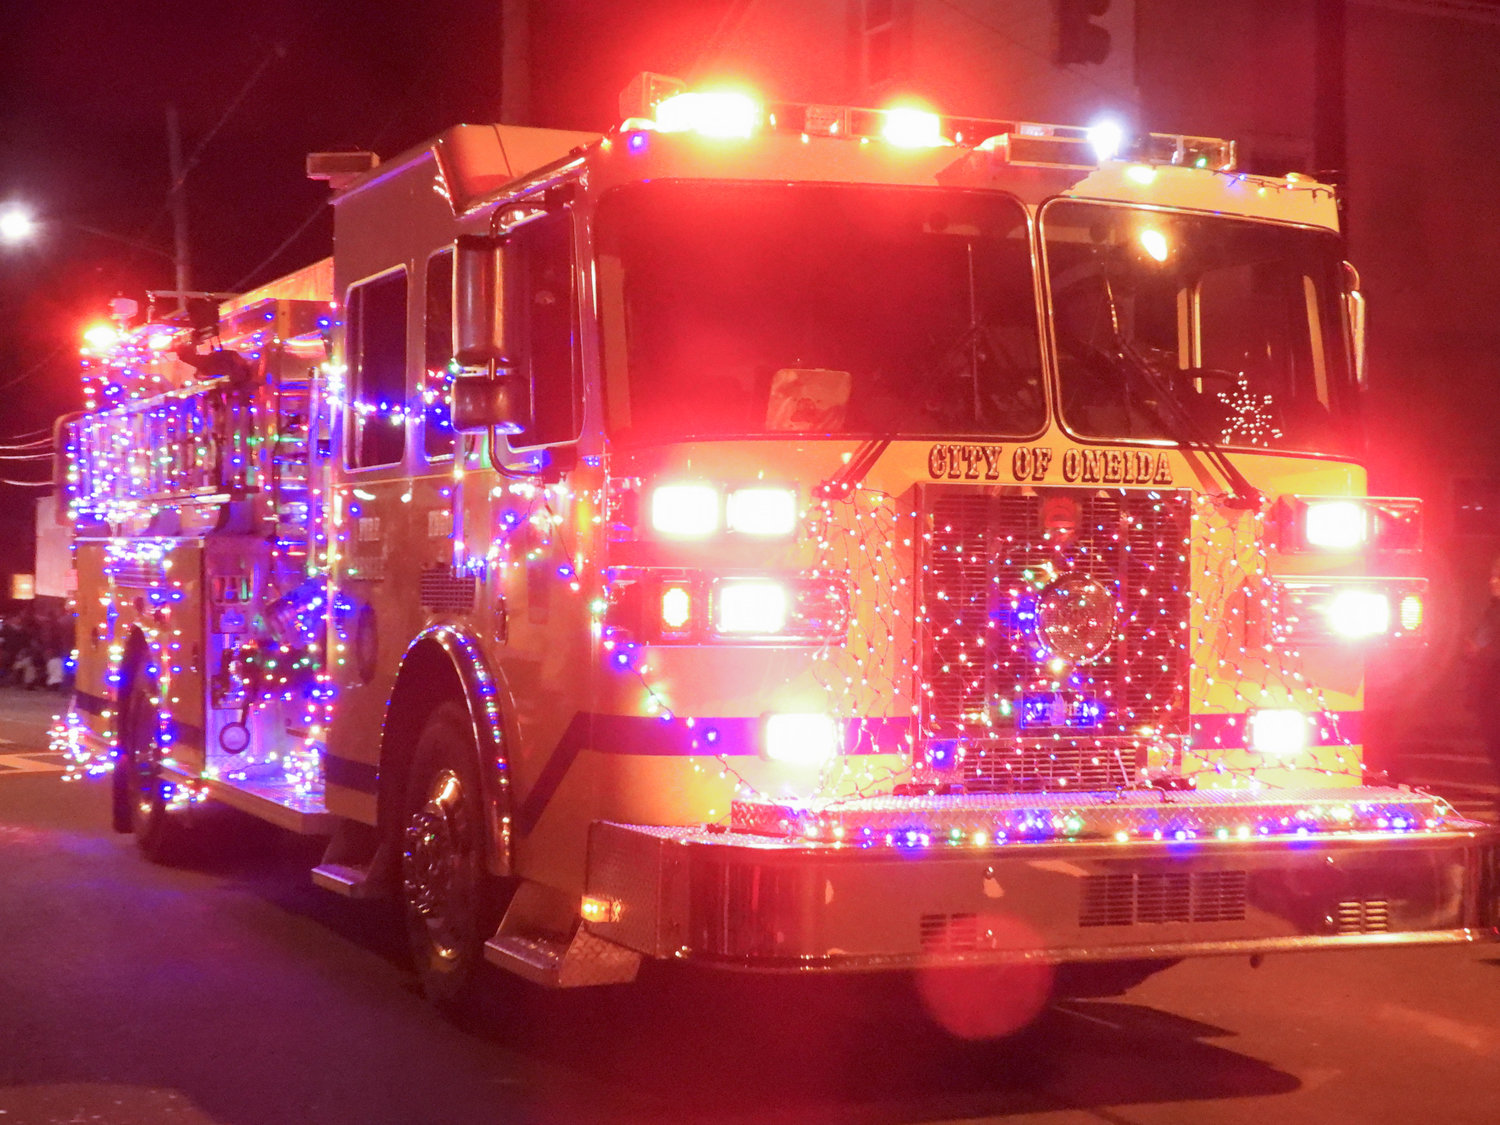 The Canastota Parade of Lights saw people fill the streets Saturday night to welcome in the holiday season. Pictured is a fire truck from the Oneida Fire Department, decked out in lights.